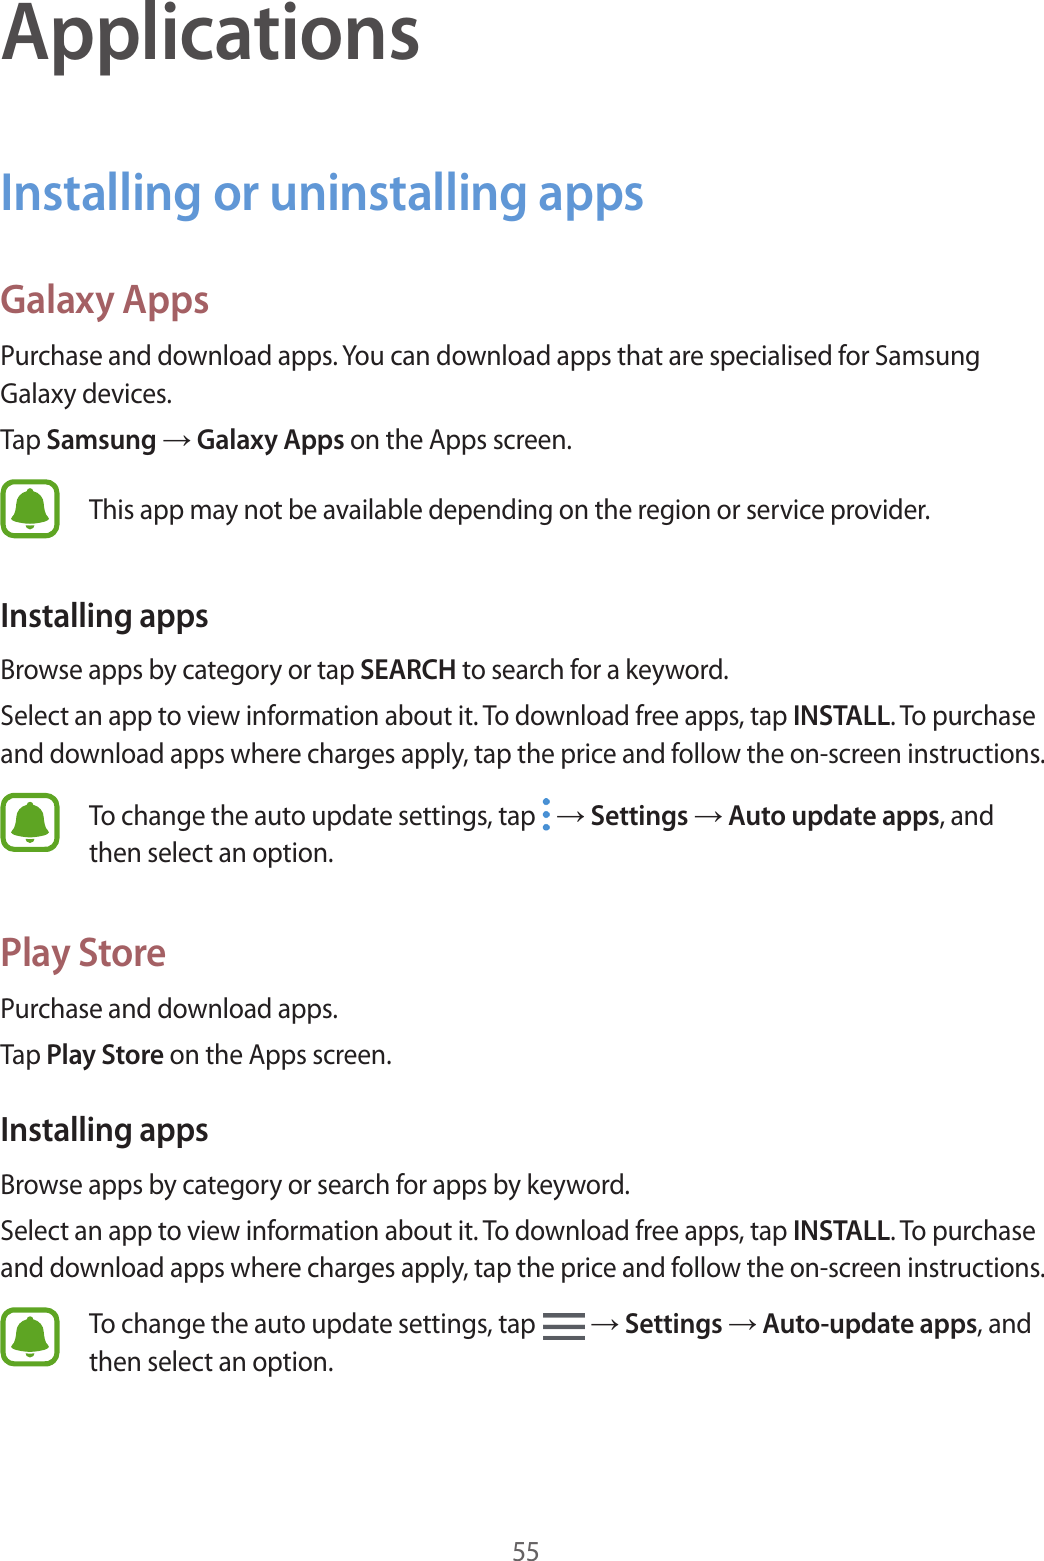 55ApplicationsInstalling or uninstalling appsGalaxy AppsPurchase and download apps. You can download apps that are specialised for Samsung Galaxy devices.Tap Samsung → Galaxy Apps on the Apps screen.This app may not be available depending on the region or service provider.Installing appsBrowse apps by category or tap SEARCH to search for a keyword.Select an app to view information about it. To download free apps, tap INSTALL. To purchase and download apps where charges apply, tap the price and follow the on-screen instructions.To change the auto update settings, tap   → Settings → Auto update apps, and then select an option.Play StorePurchase and download apps.Tap Play Store on the Apps screen.Installing appsBrowse apps by category or search for apps by keyword.Select an app to view information about it. To download free apps, tap INSTALL. To purchase and download apps where charges apply, tap the price and follow the on-screen instructions.To change the auto update settings, tap   → Settings → Auto-update apps, and then select an option.